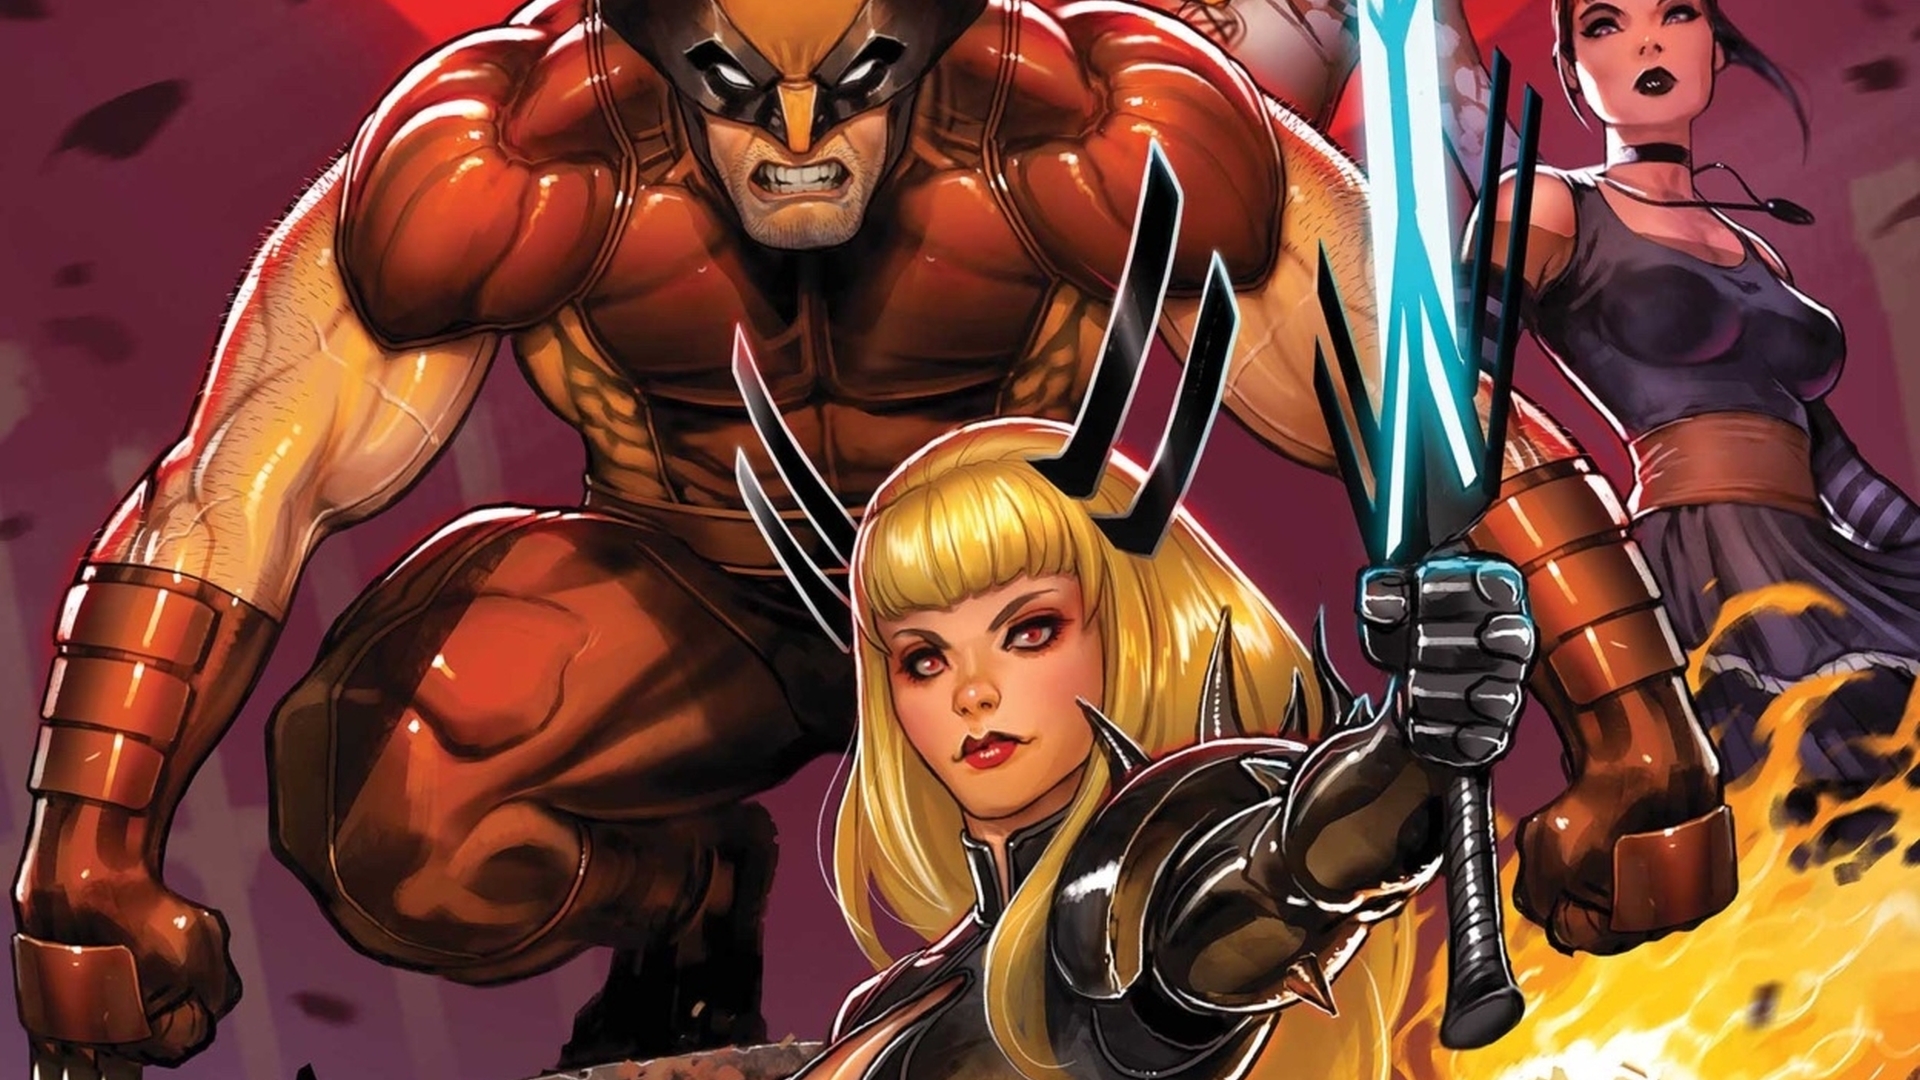 Marvel's Midnight Suns has been delayed again